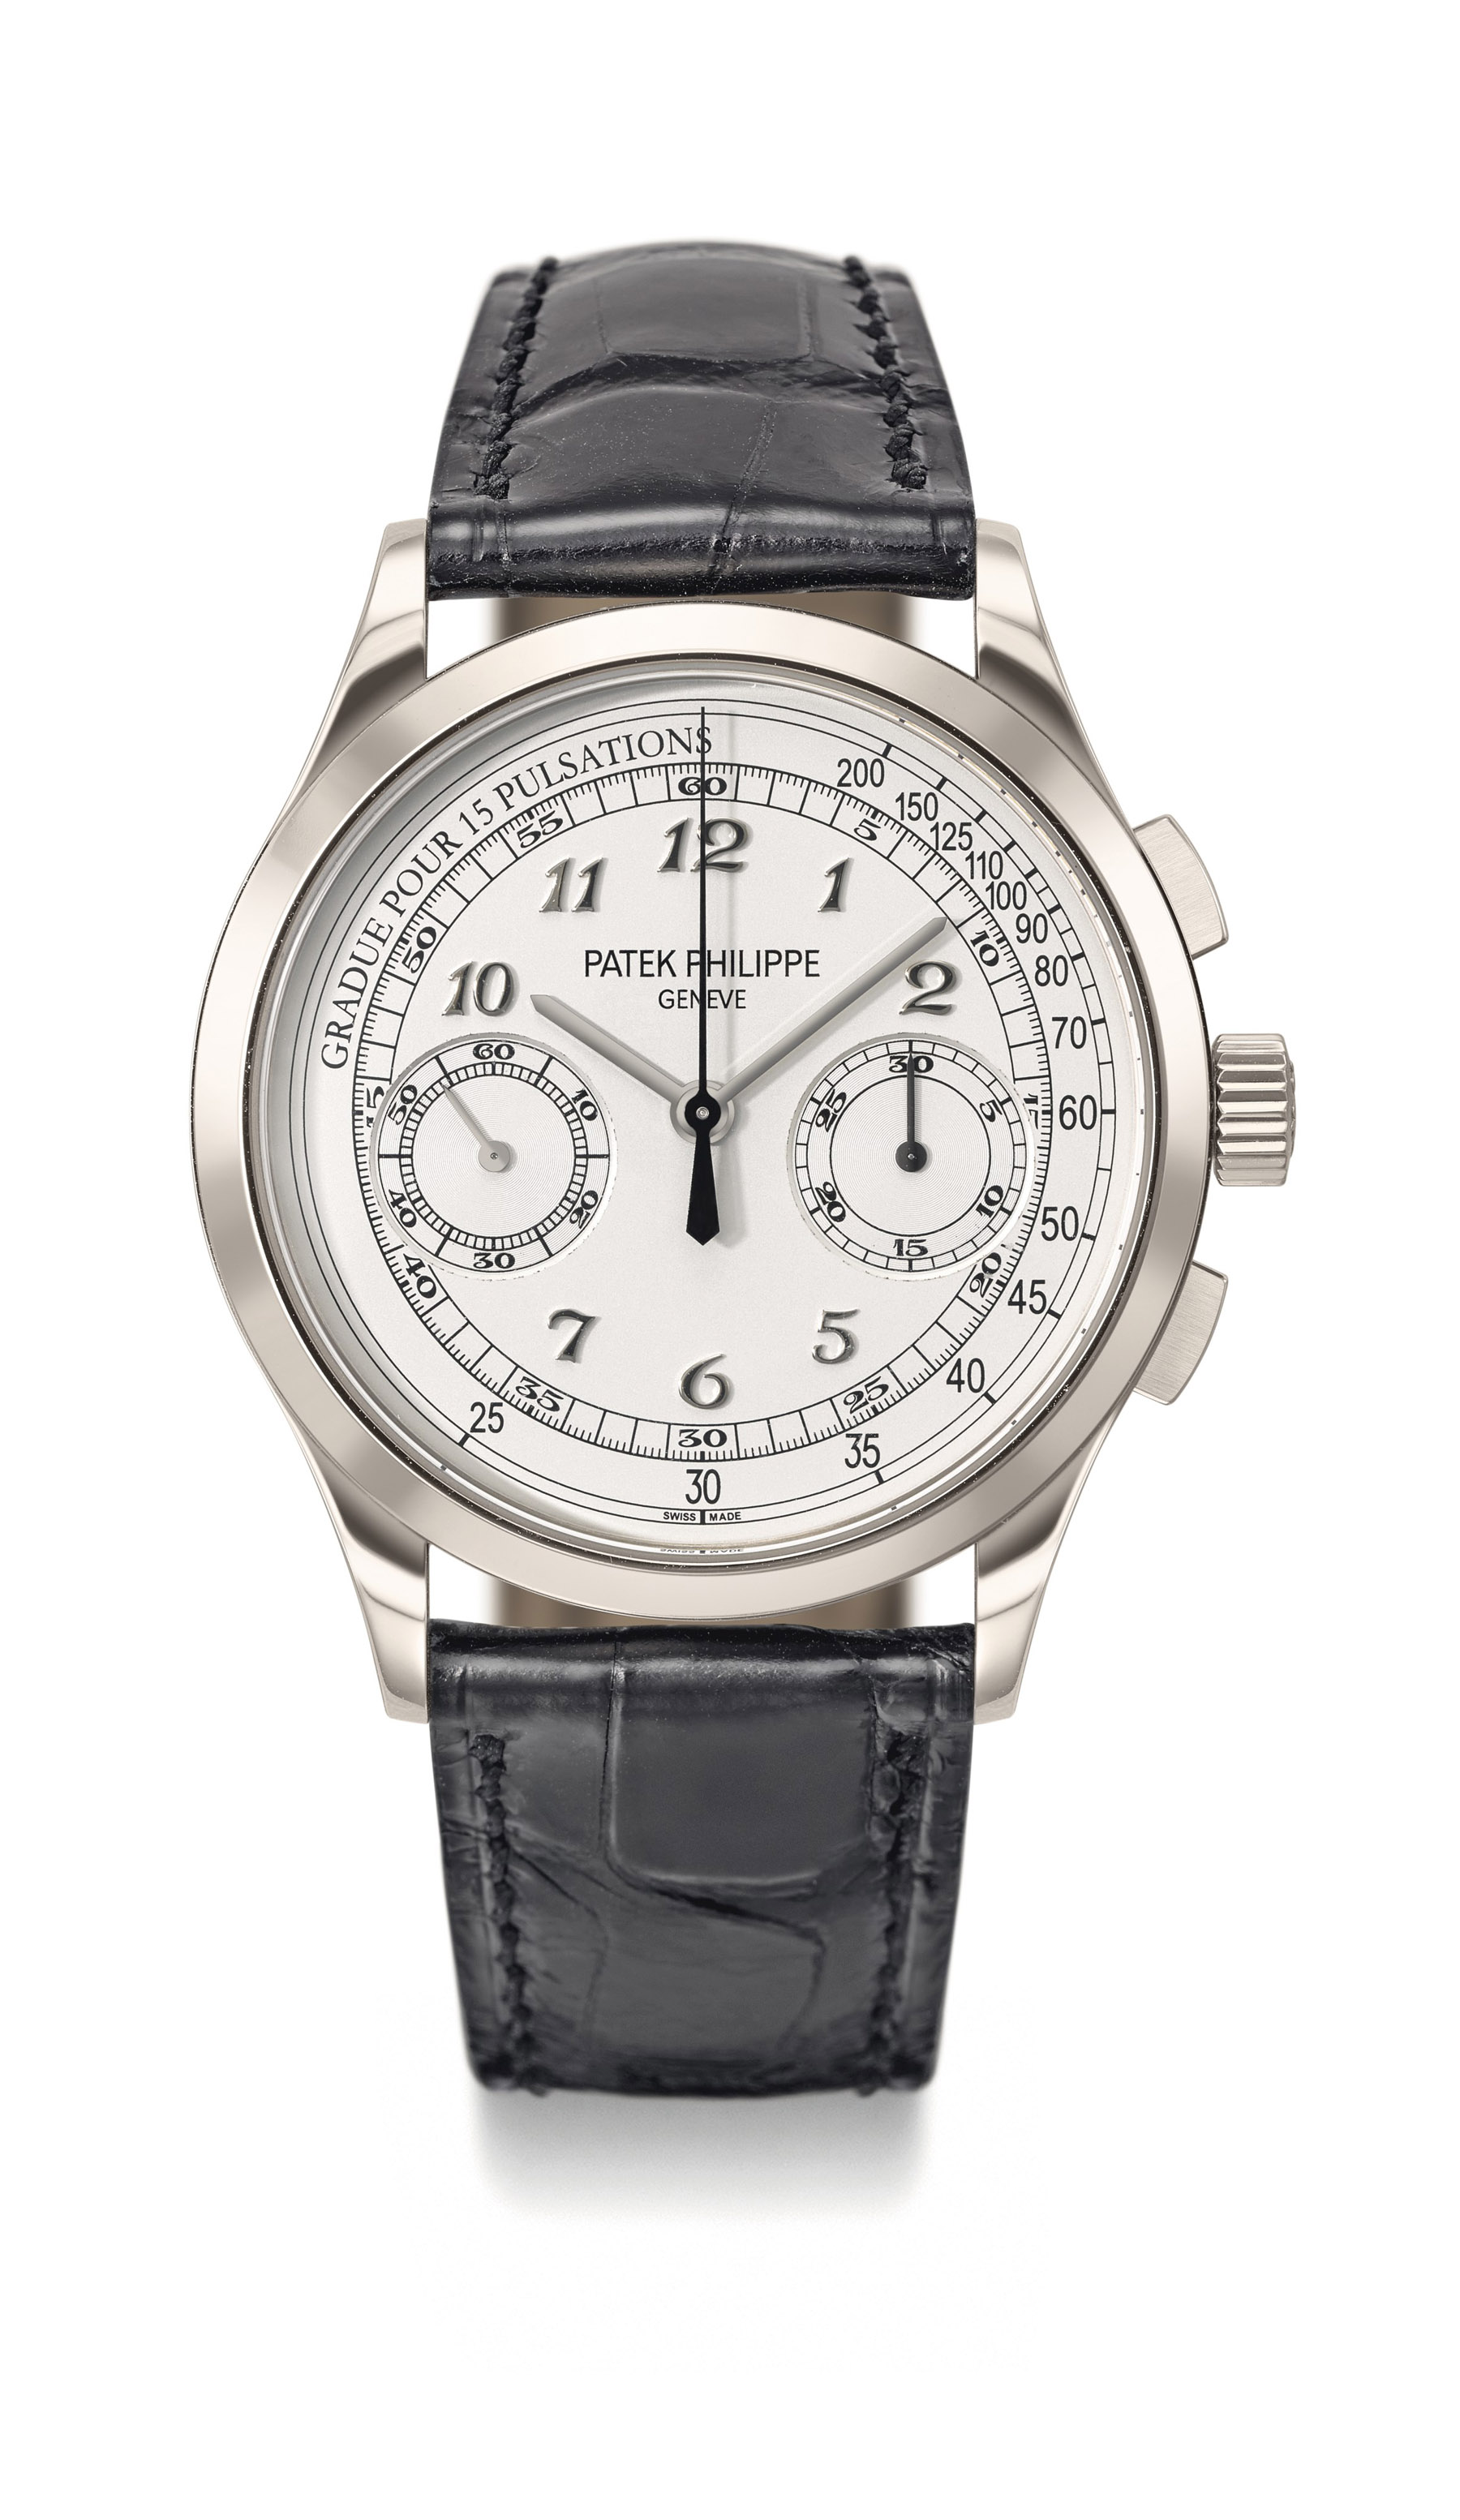 Patek Philippe. A fine and rare 18K white gold chronograph wristwatch with Breguet numerals and pulsation scale Ref. 5170G-001, Circa 2013 Estimate CHF 30,000 – 50,000